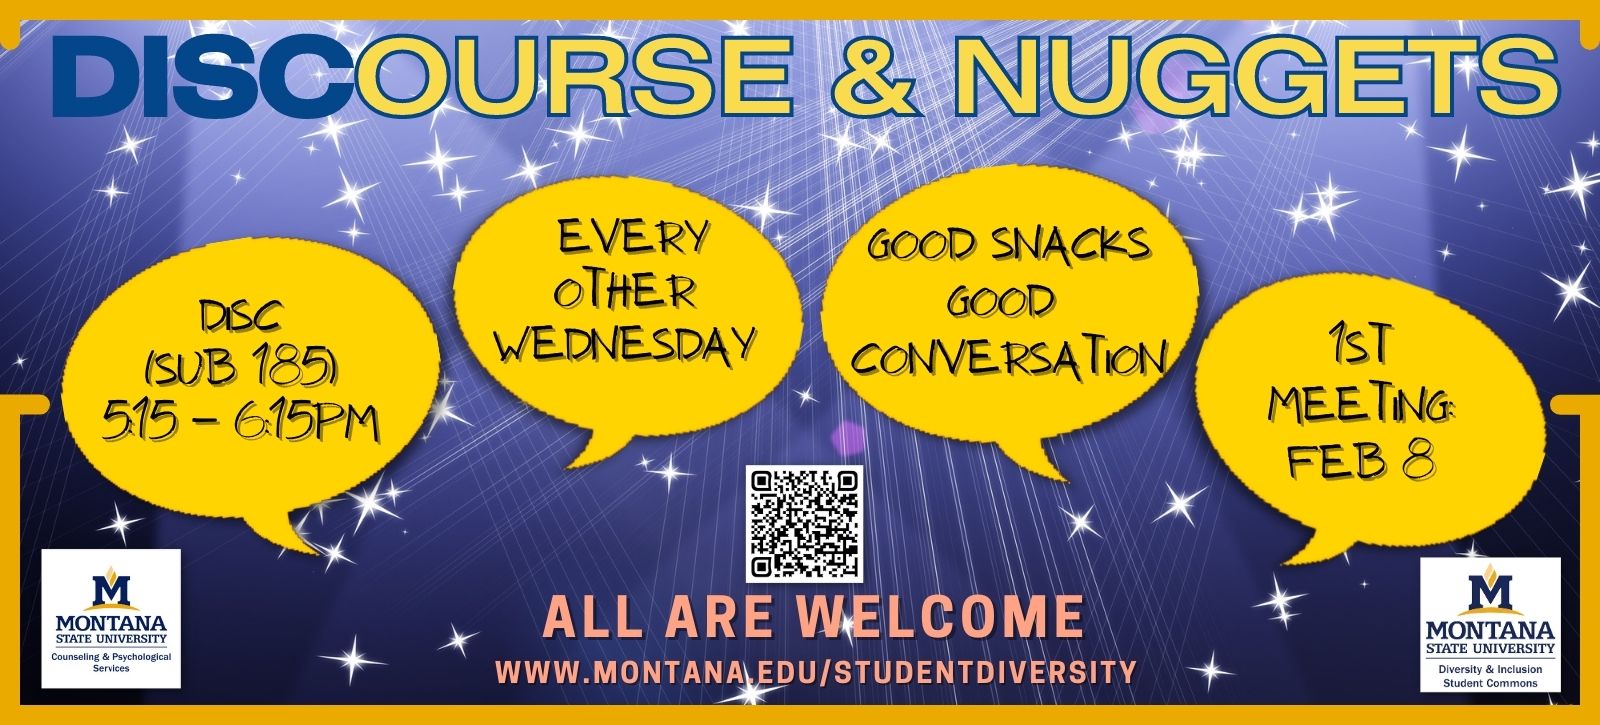 DISCourse & Nuggets: Good Snacks; Good Conversation.  Every other Wednesday, starting February 8th, in the DISC SUB 185